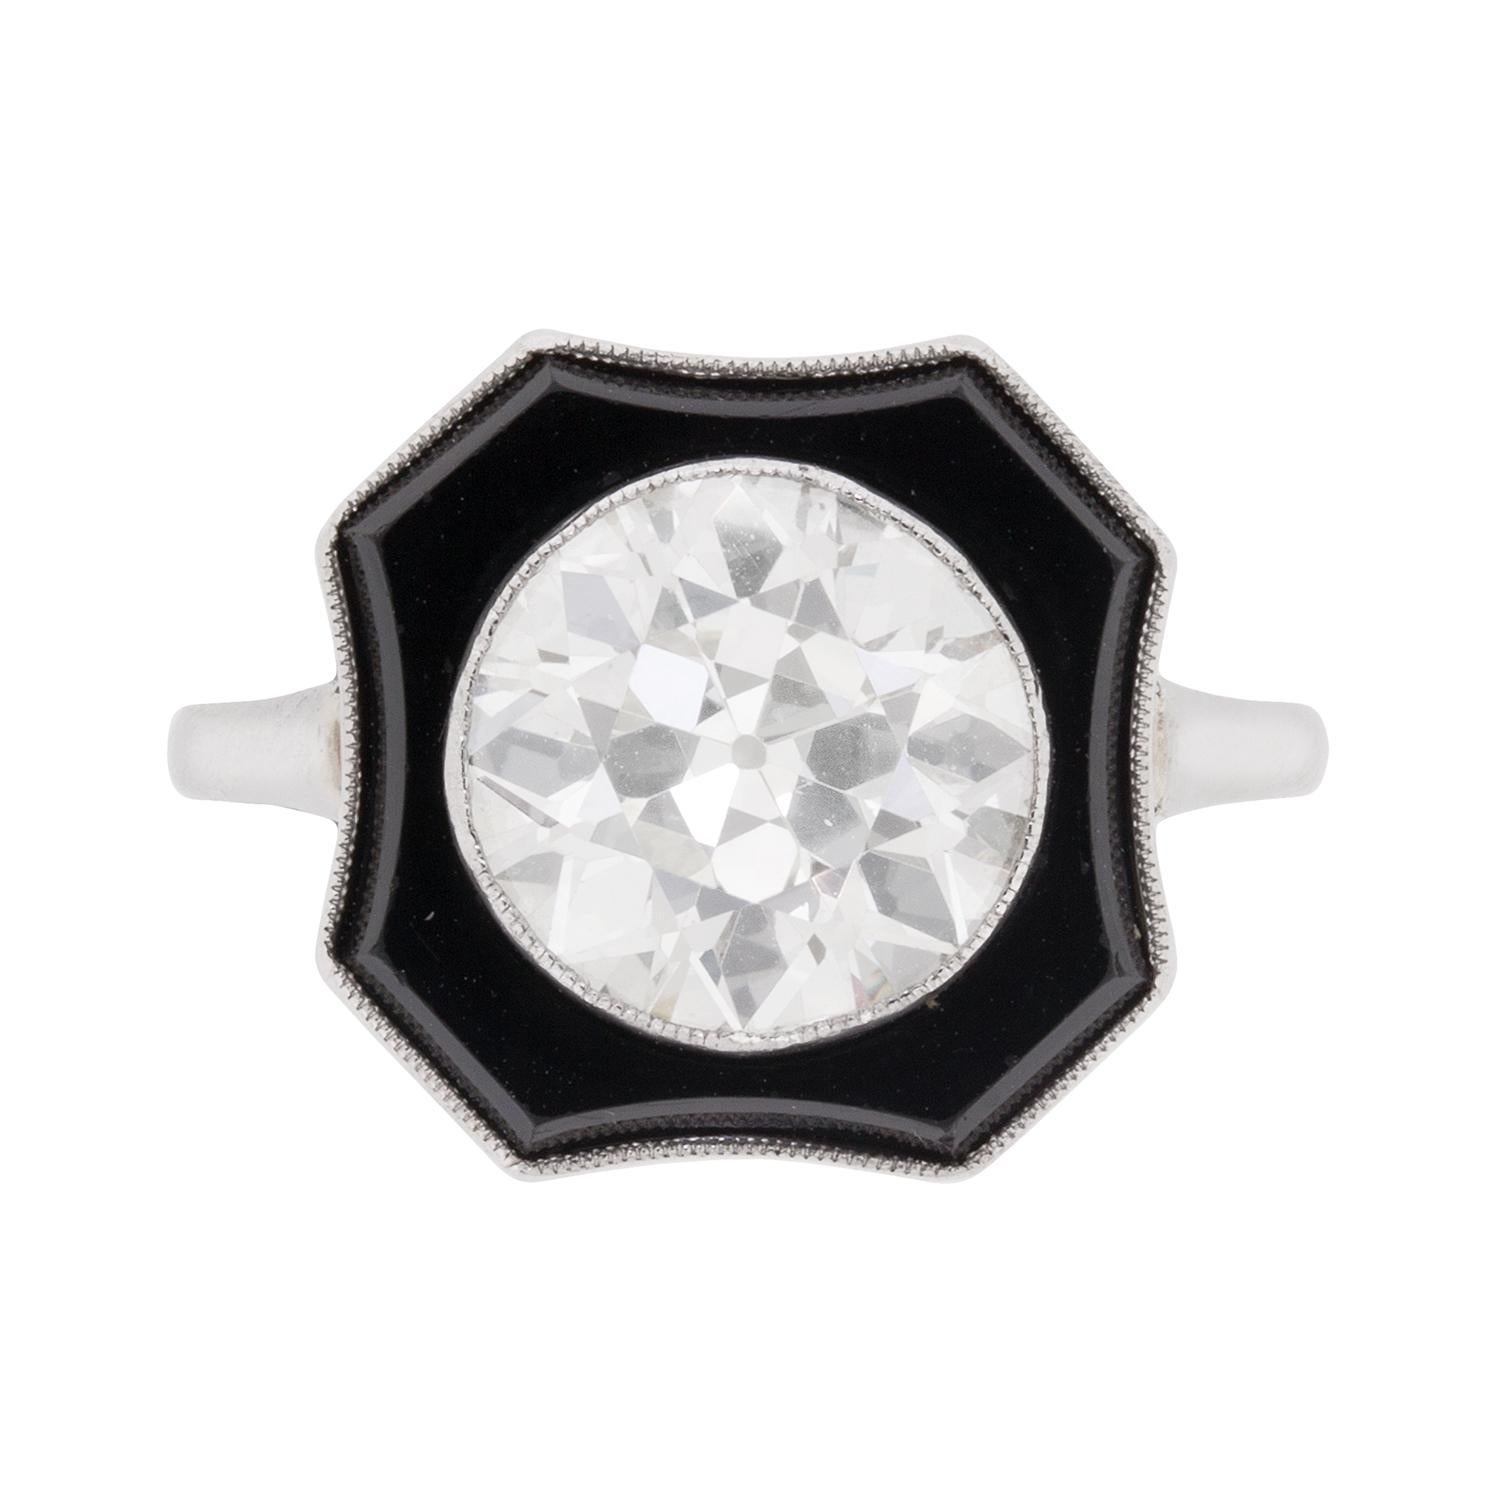 What is a black onyx ring worth?